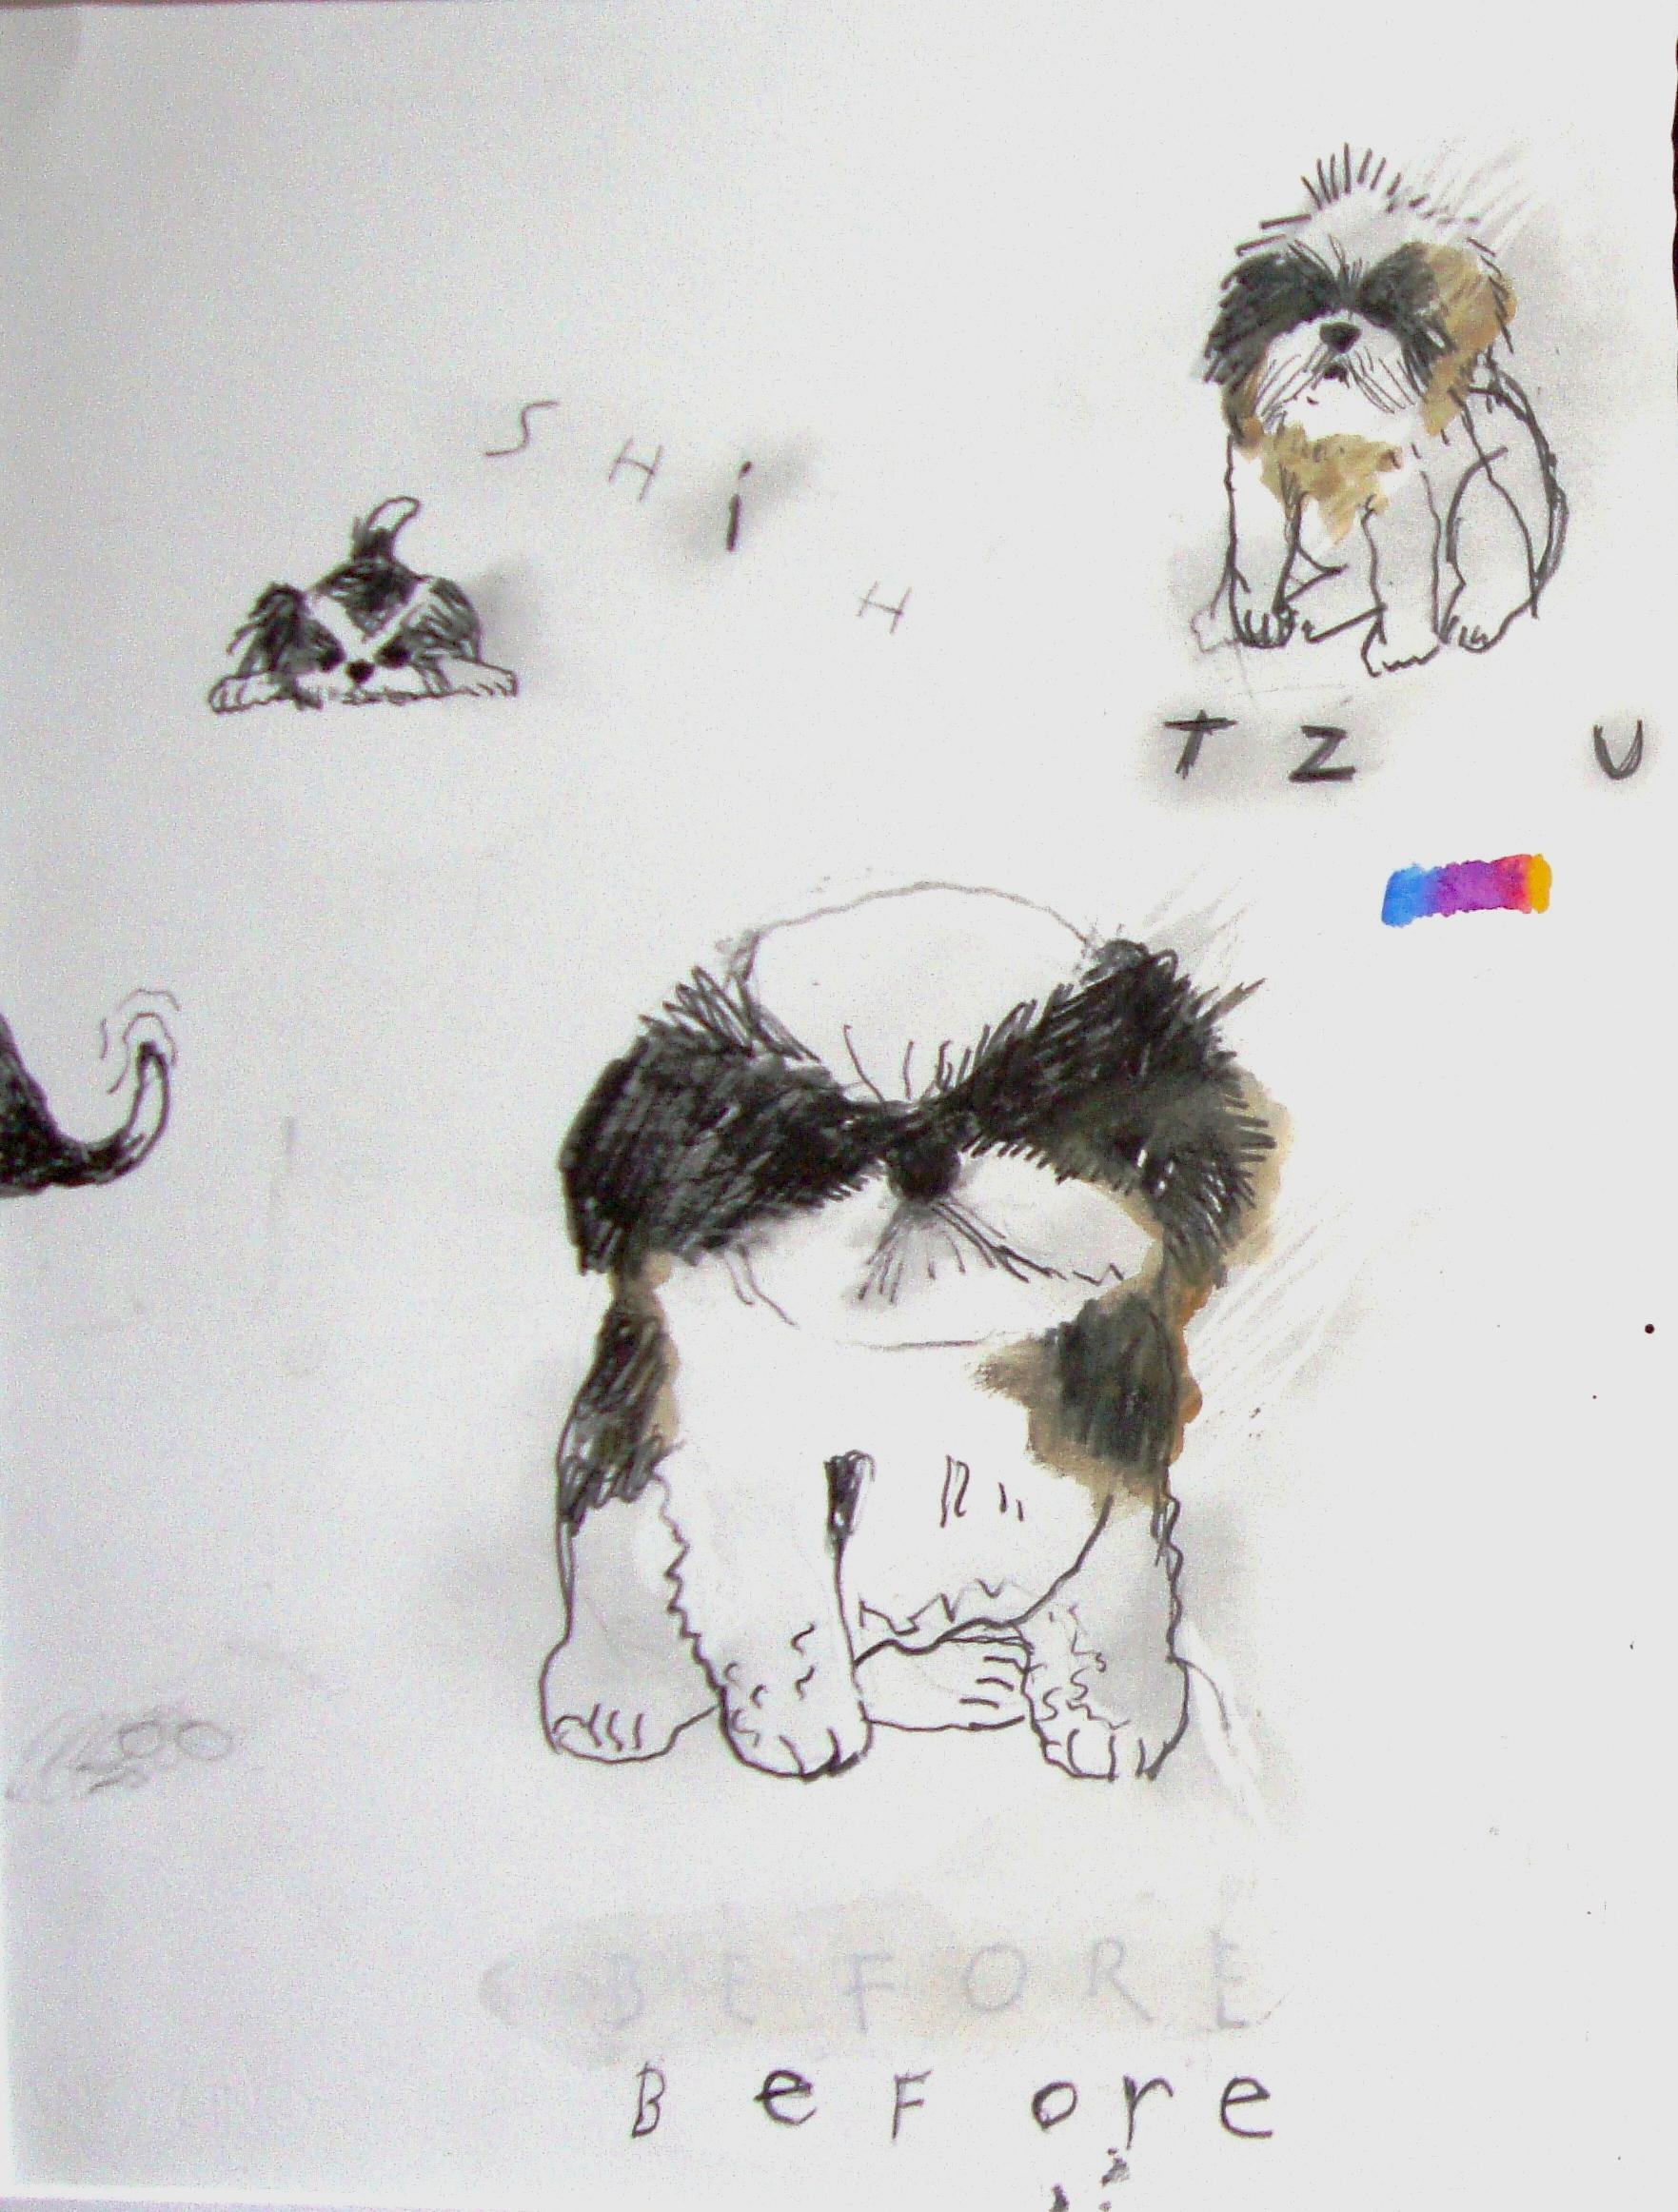 Contemporary, sentimental painting of a Shit Tzu with graphite drawings  - Art by Robert Zakanitch